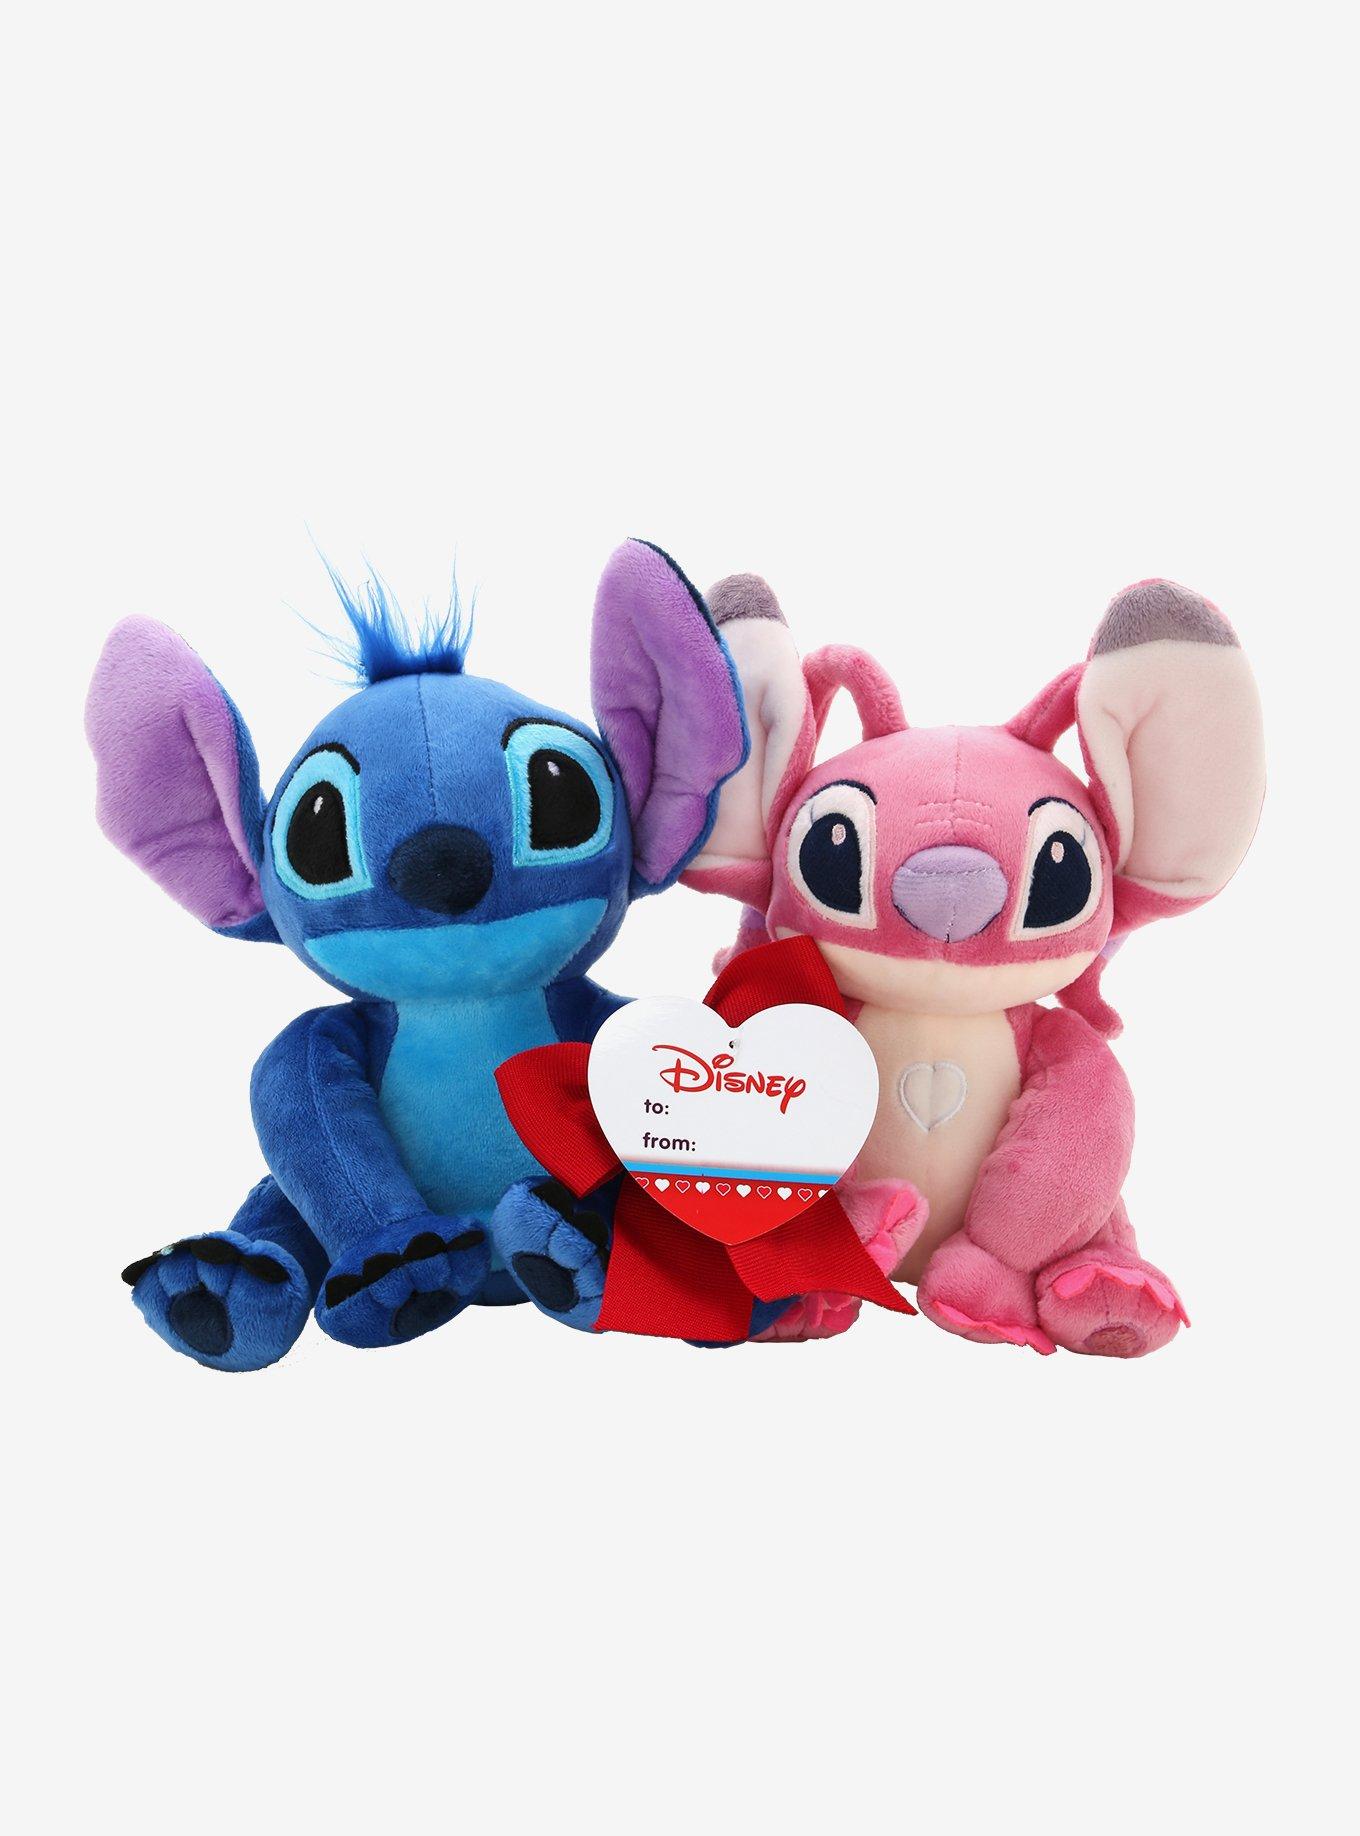 Perfect valentines gift for stitch lovers